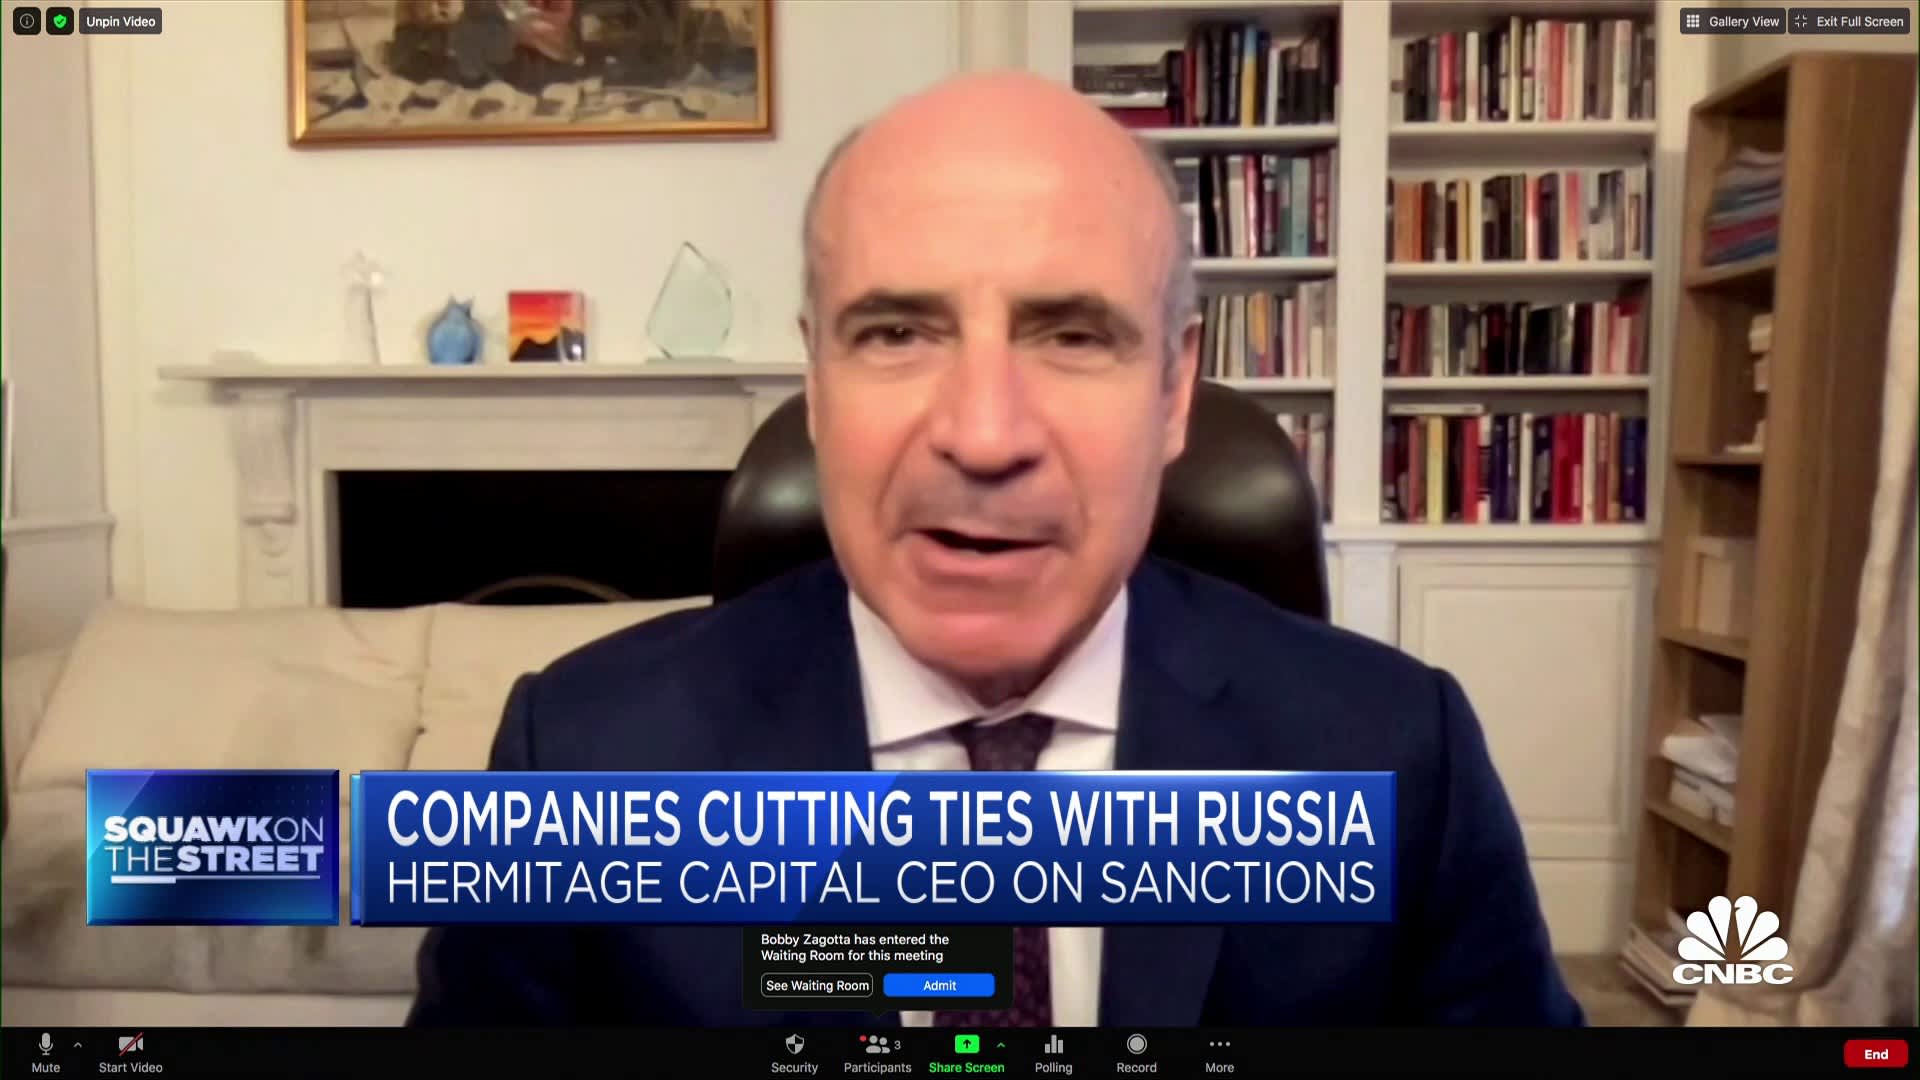 We should disconnect 100% of Russian banks from SWIFT: Bill Browder￼